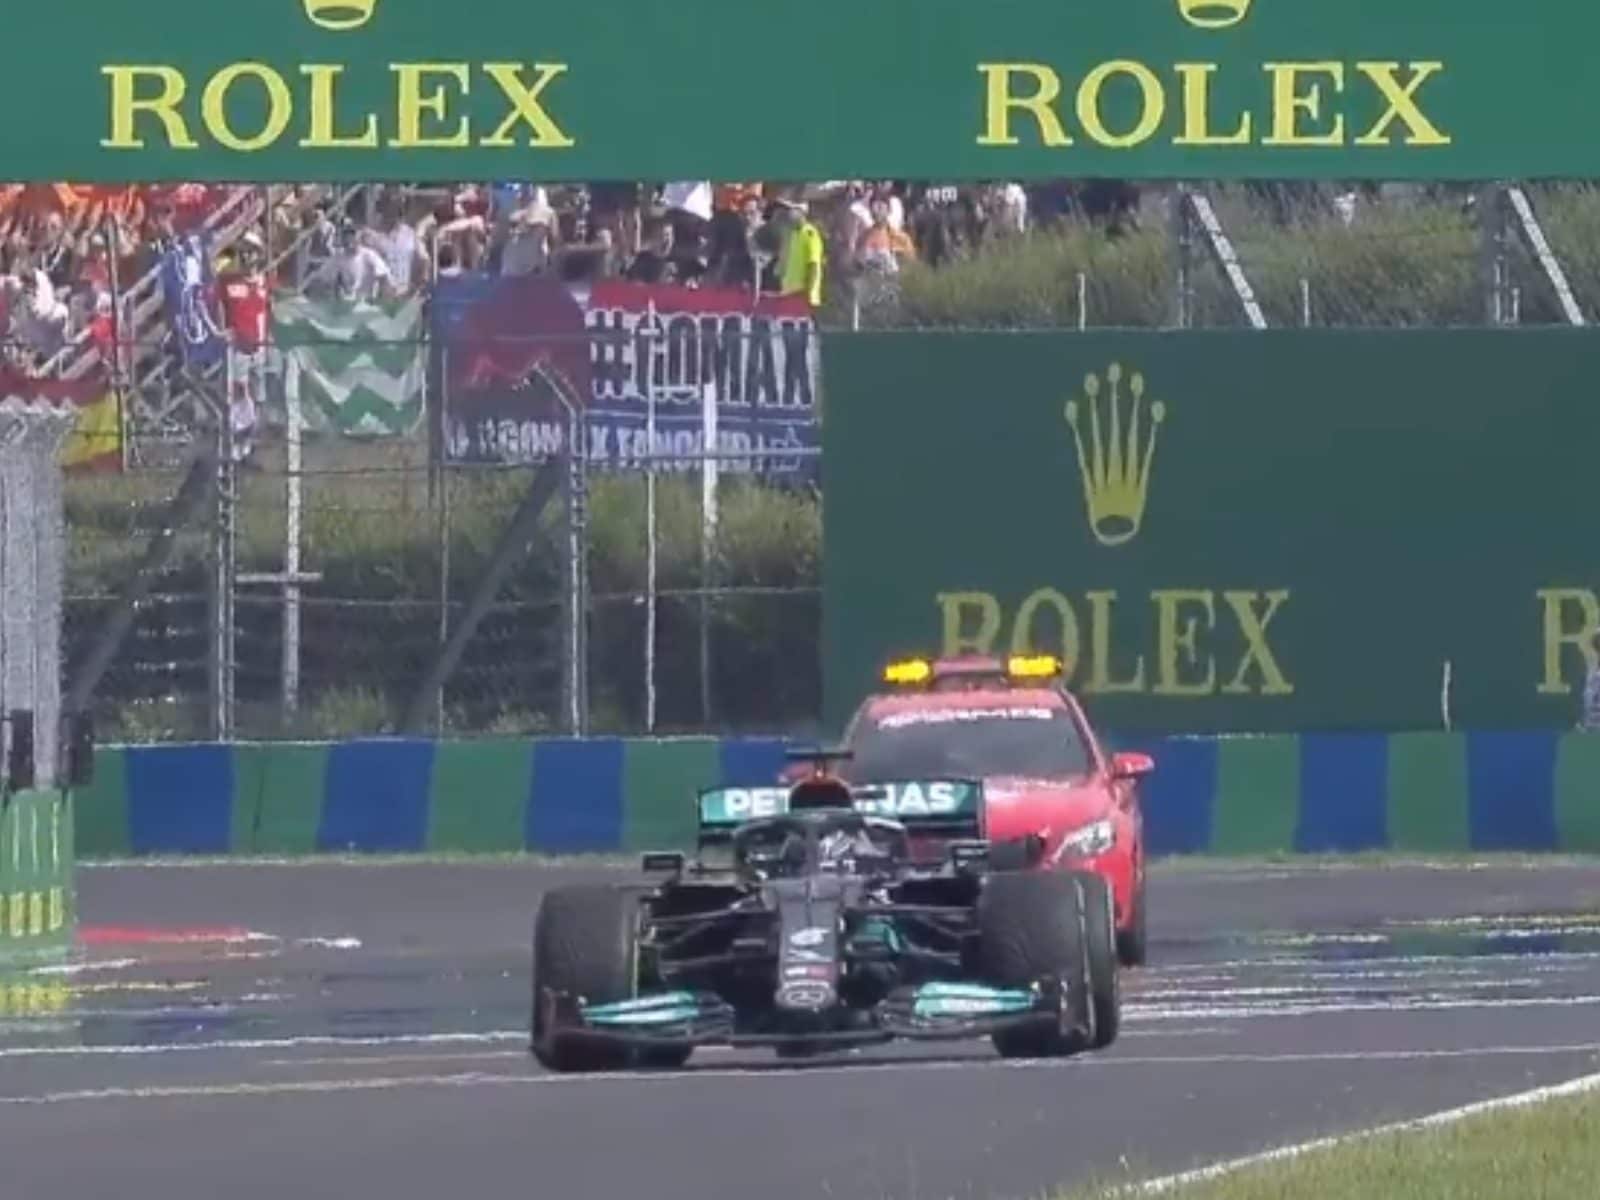 Hamilton Starts Alone on Grid in Bizarre Moment after 1st Lap Crash at Hungarian GP